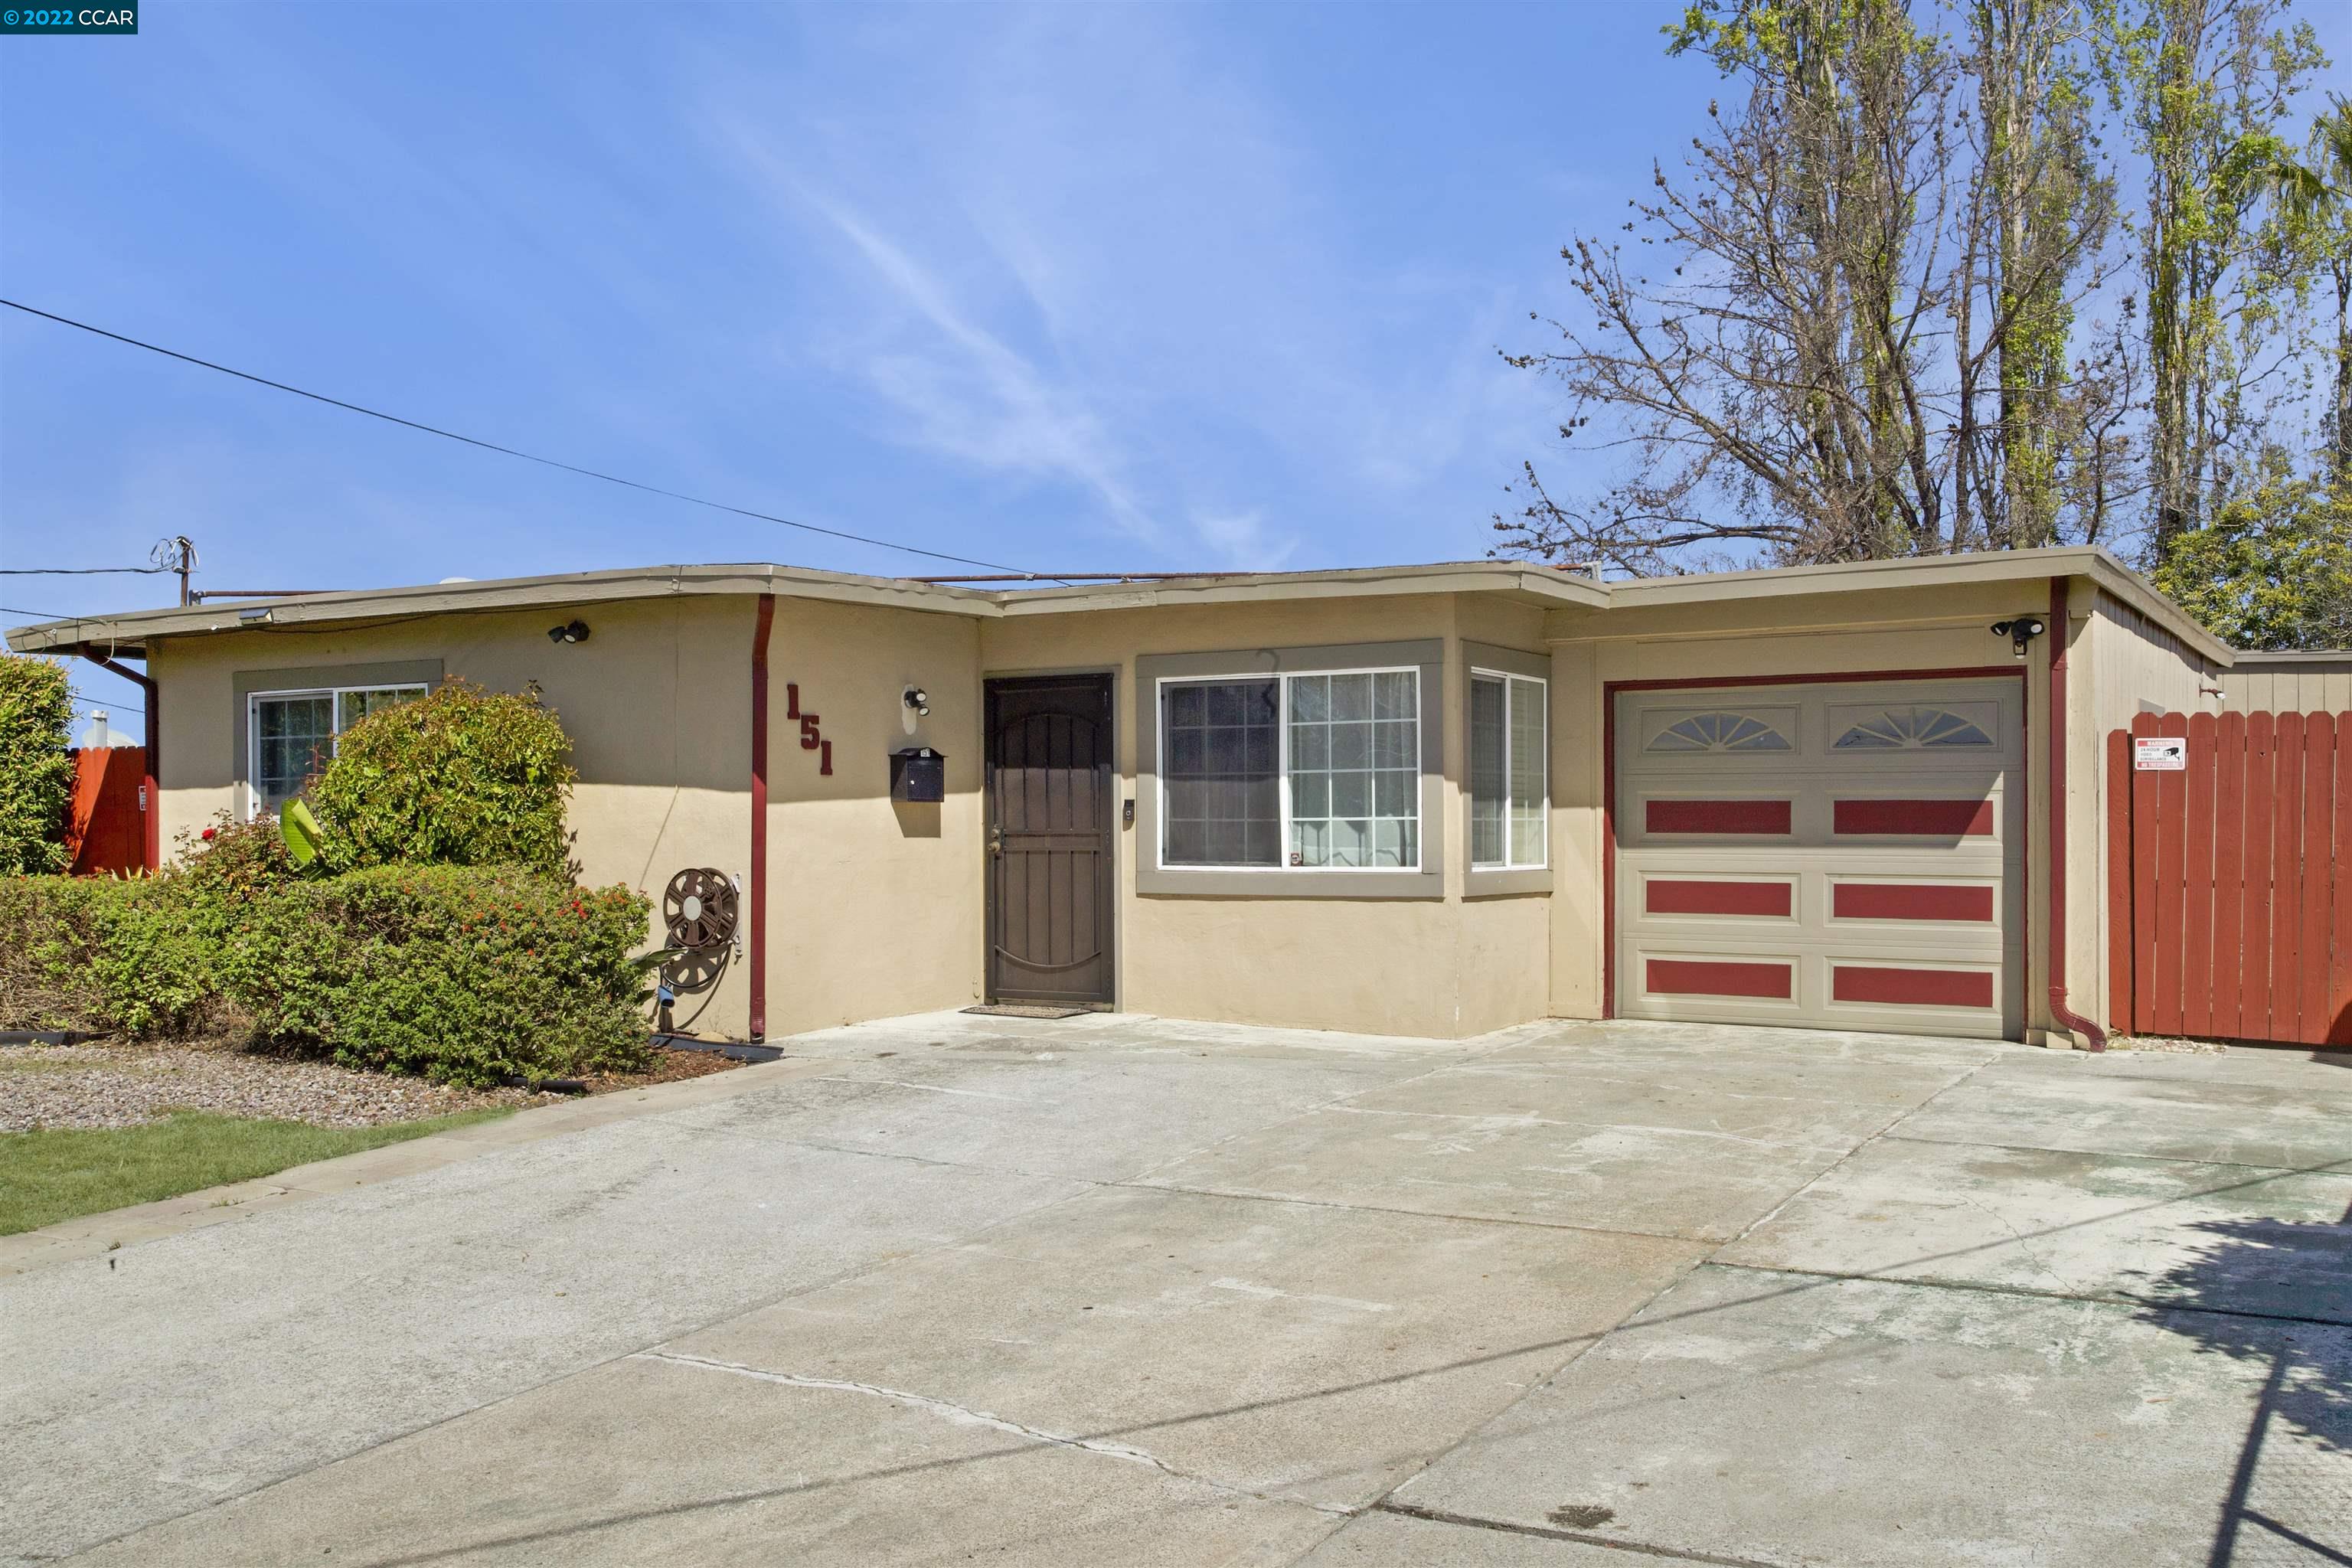 Photo of 151 Montalvin Dr in San Pablo, CA